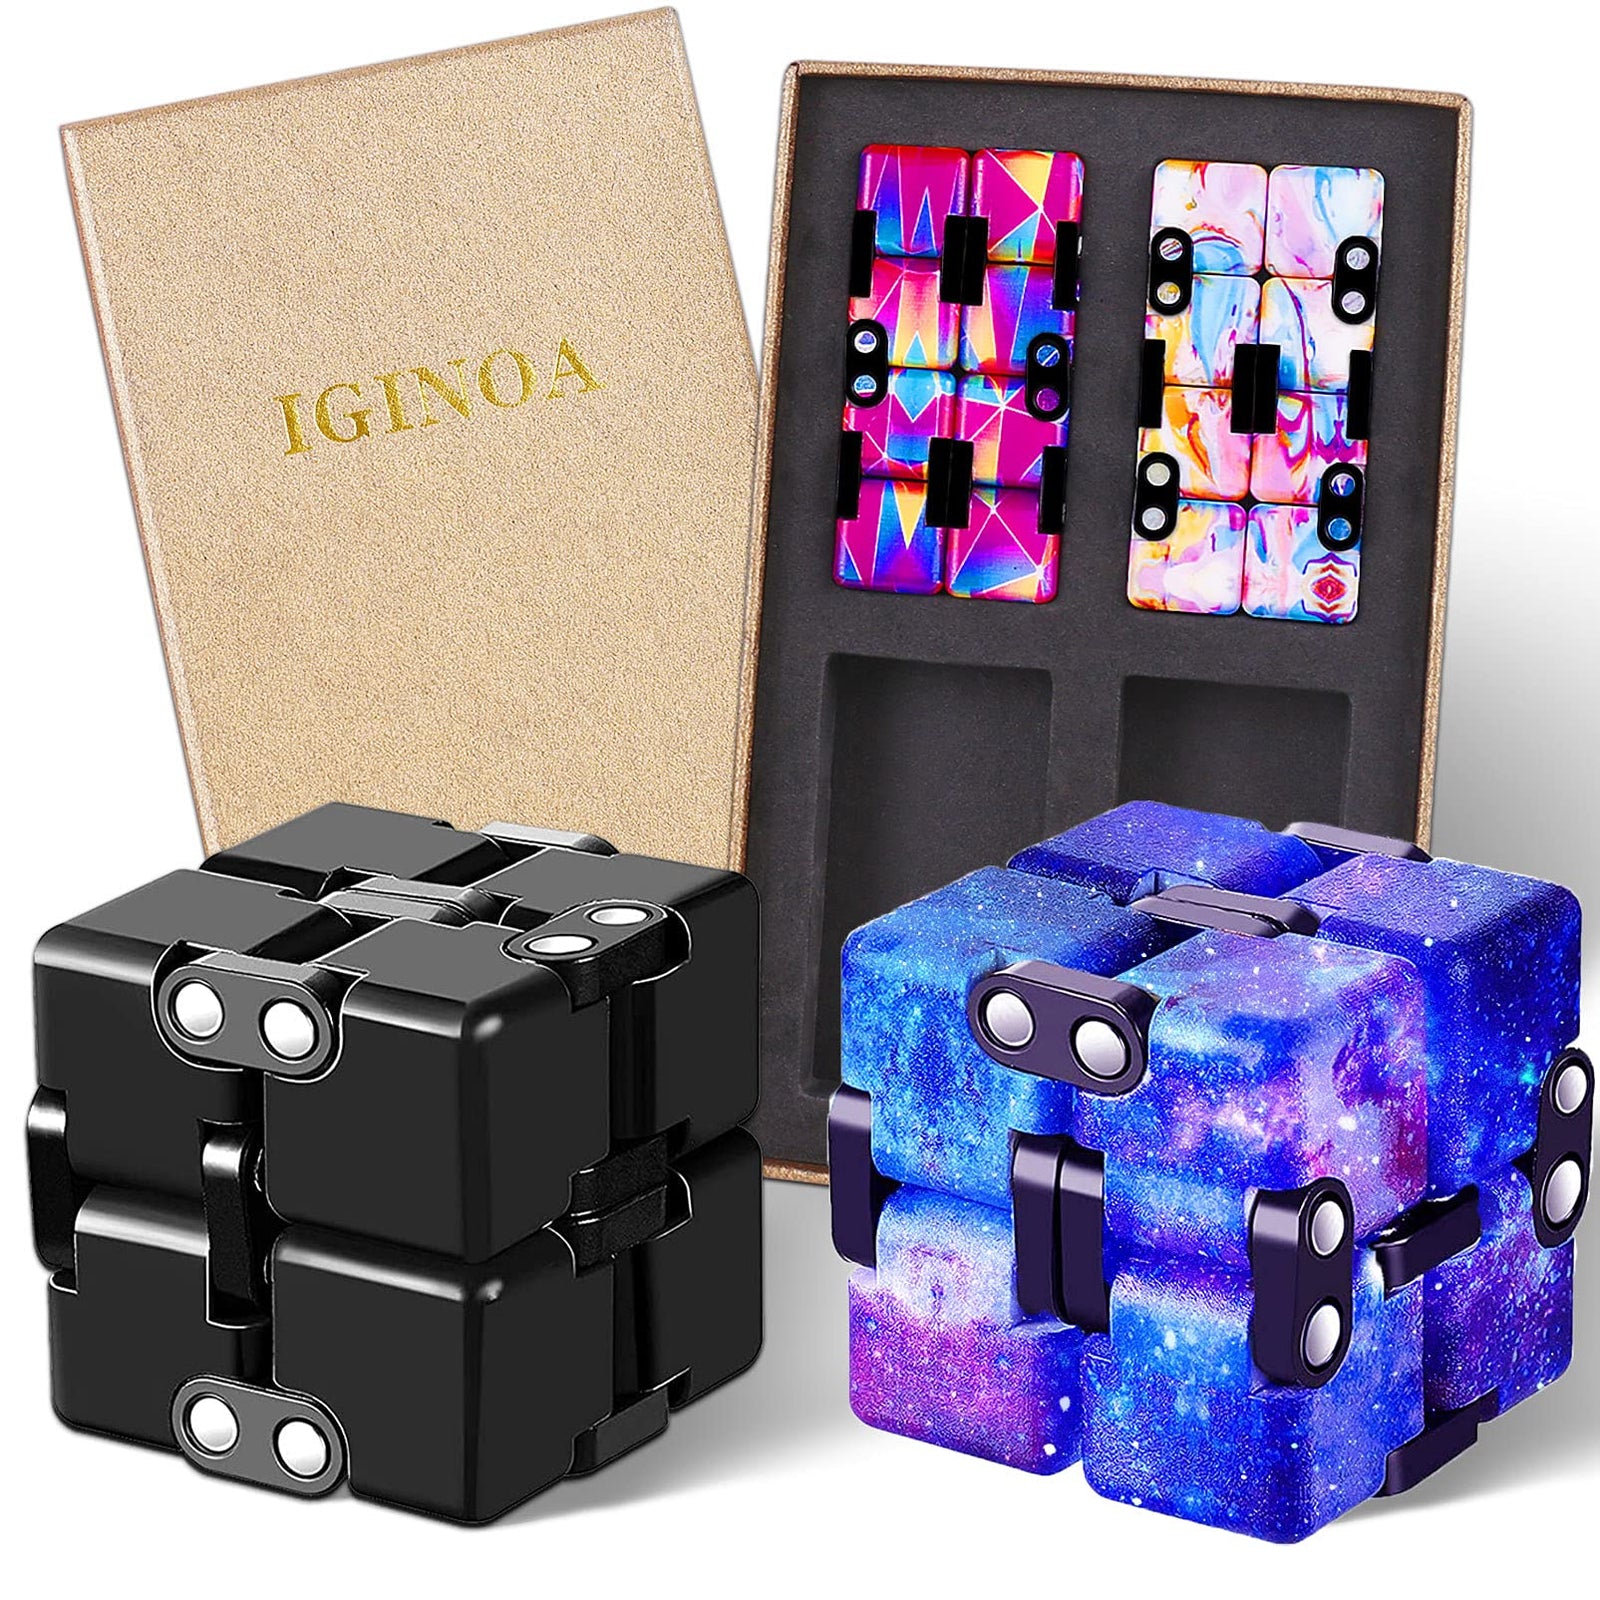 IGINOA 4 Packs Infinity Cube Fidget Toy Stress Relieving Fidgeting Game for Kids and Adults,Cute Mini Unique Gadget Anxiety Relief Kill Time Magic Puzzle Flip ADD, ADHD, Killing